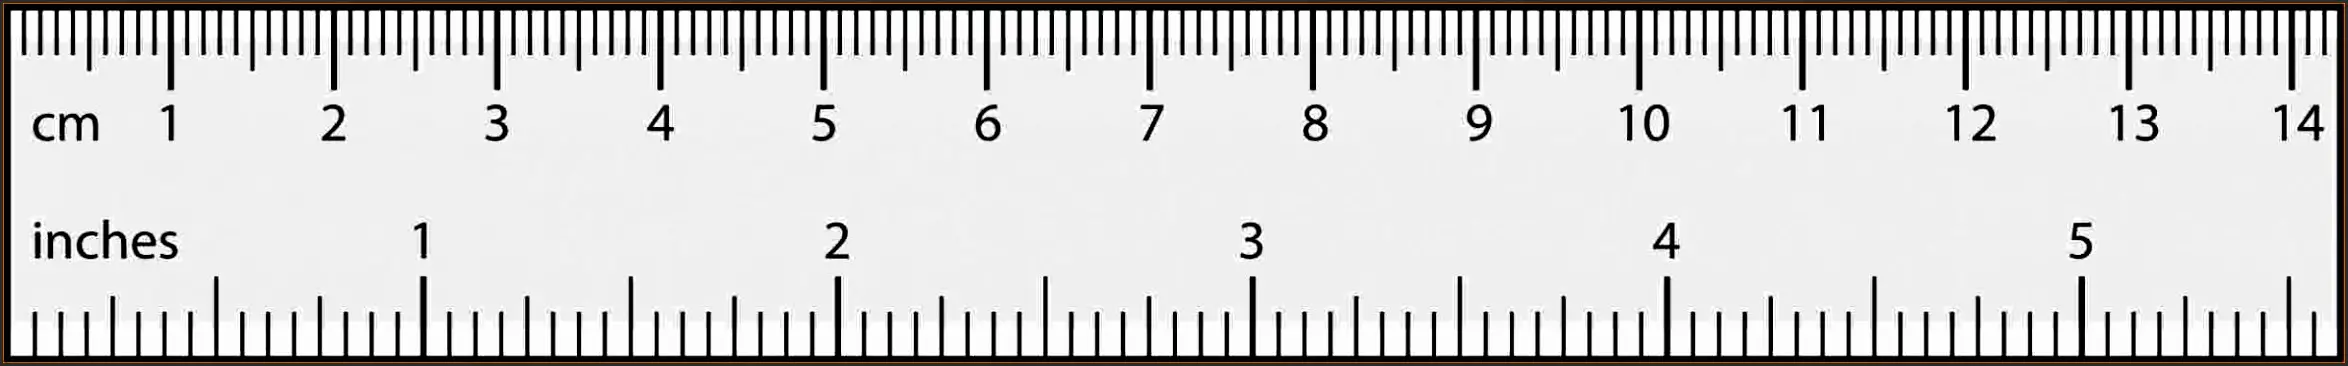 remarkable printable ruler actual size pdf ruby website